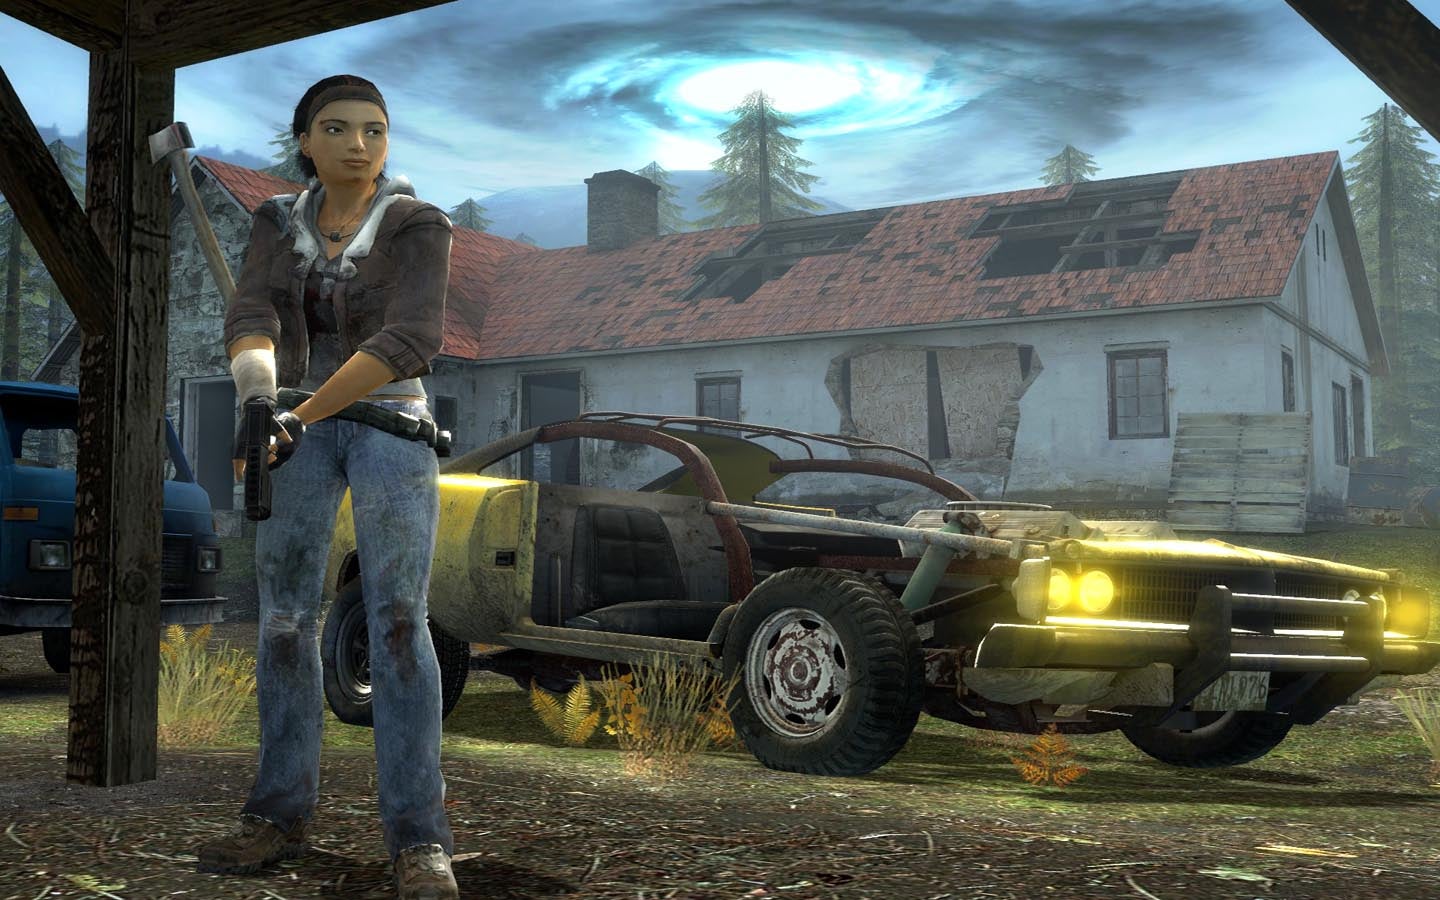 Alyx Vance stands ready to shoot next to a hollowed out car in Half-Life 2: Episode 2